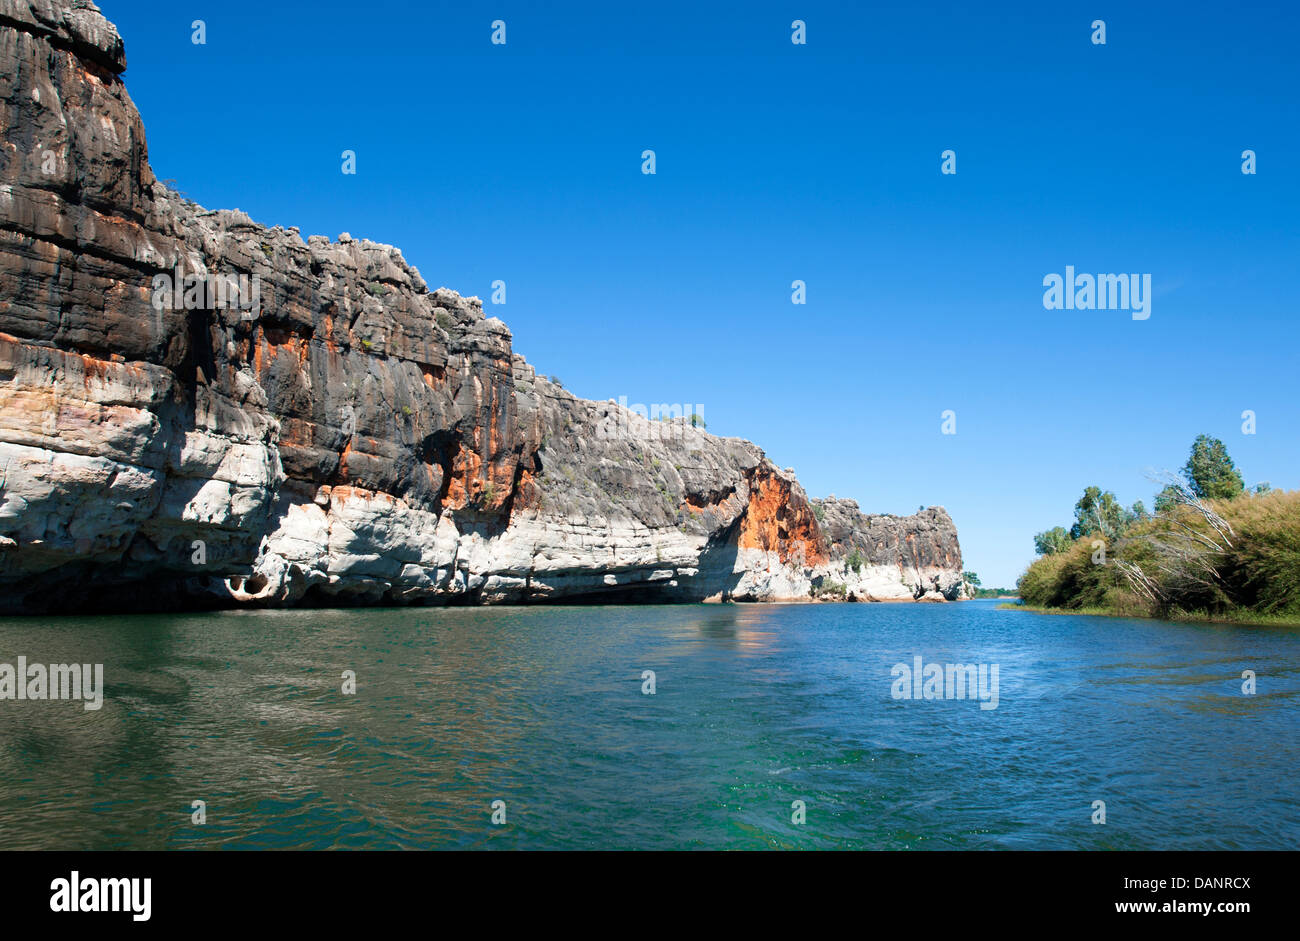 The Devonian limestone cliffs of Geilki Gorge, formed by the Fitzroy River in the Kimberley of Western Australia Stock Photo